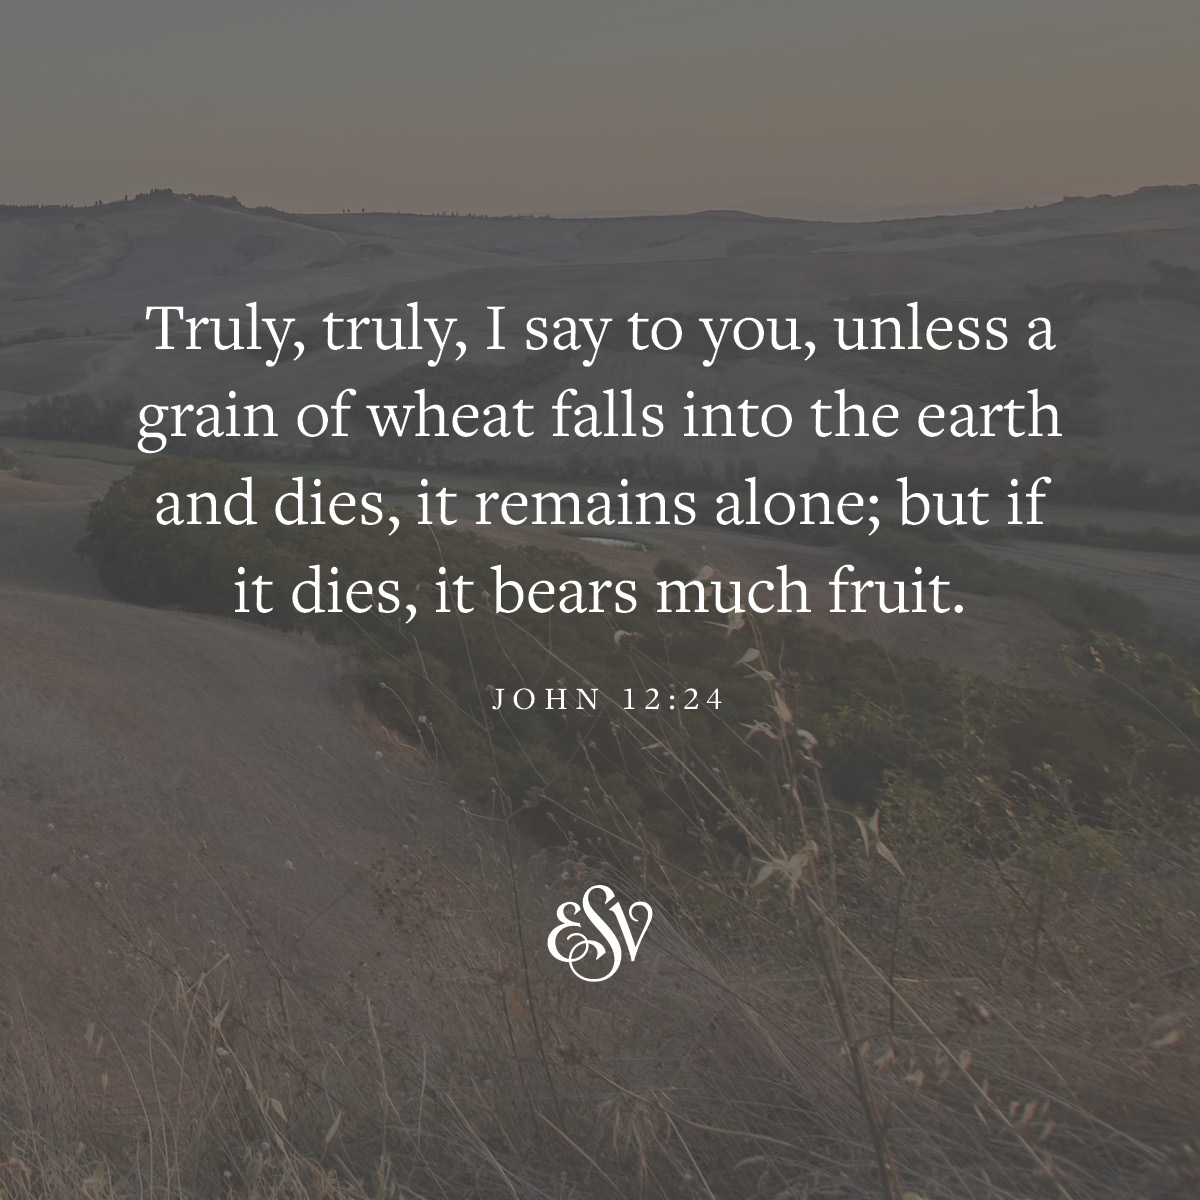 Truly, truly, I say to you, unless a grain of wheat falls into the earth and dies, it remains alone; but if it dies, it bears much fruit. 
—John 12:24 ESV.org

#Verseoftheday #ESV #Scripturememoryverse #Bible